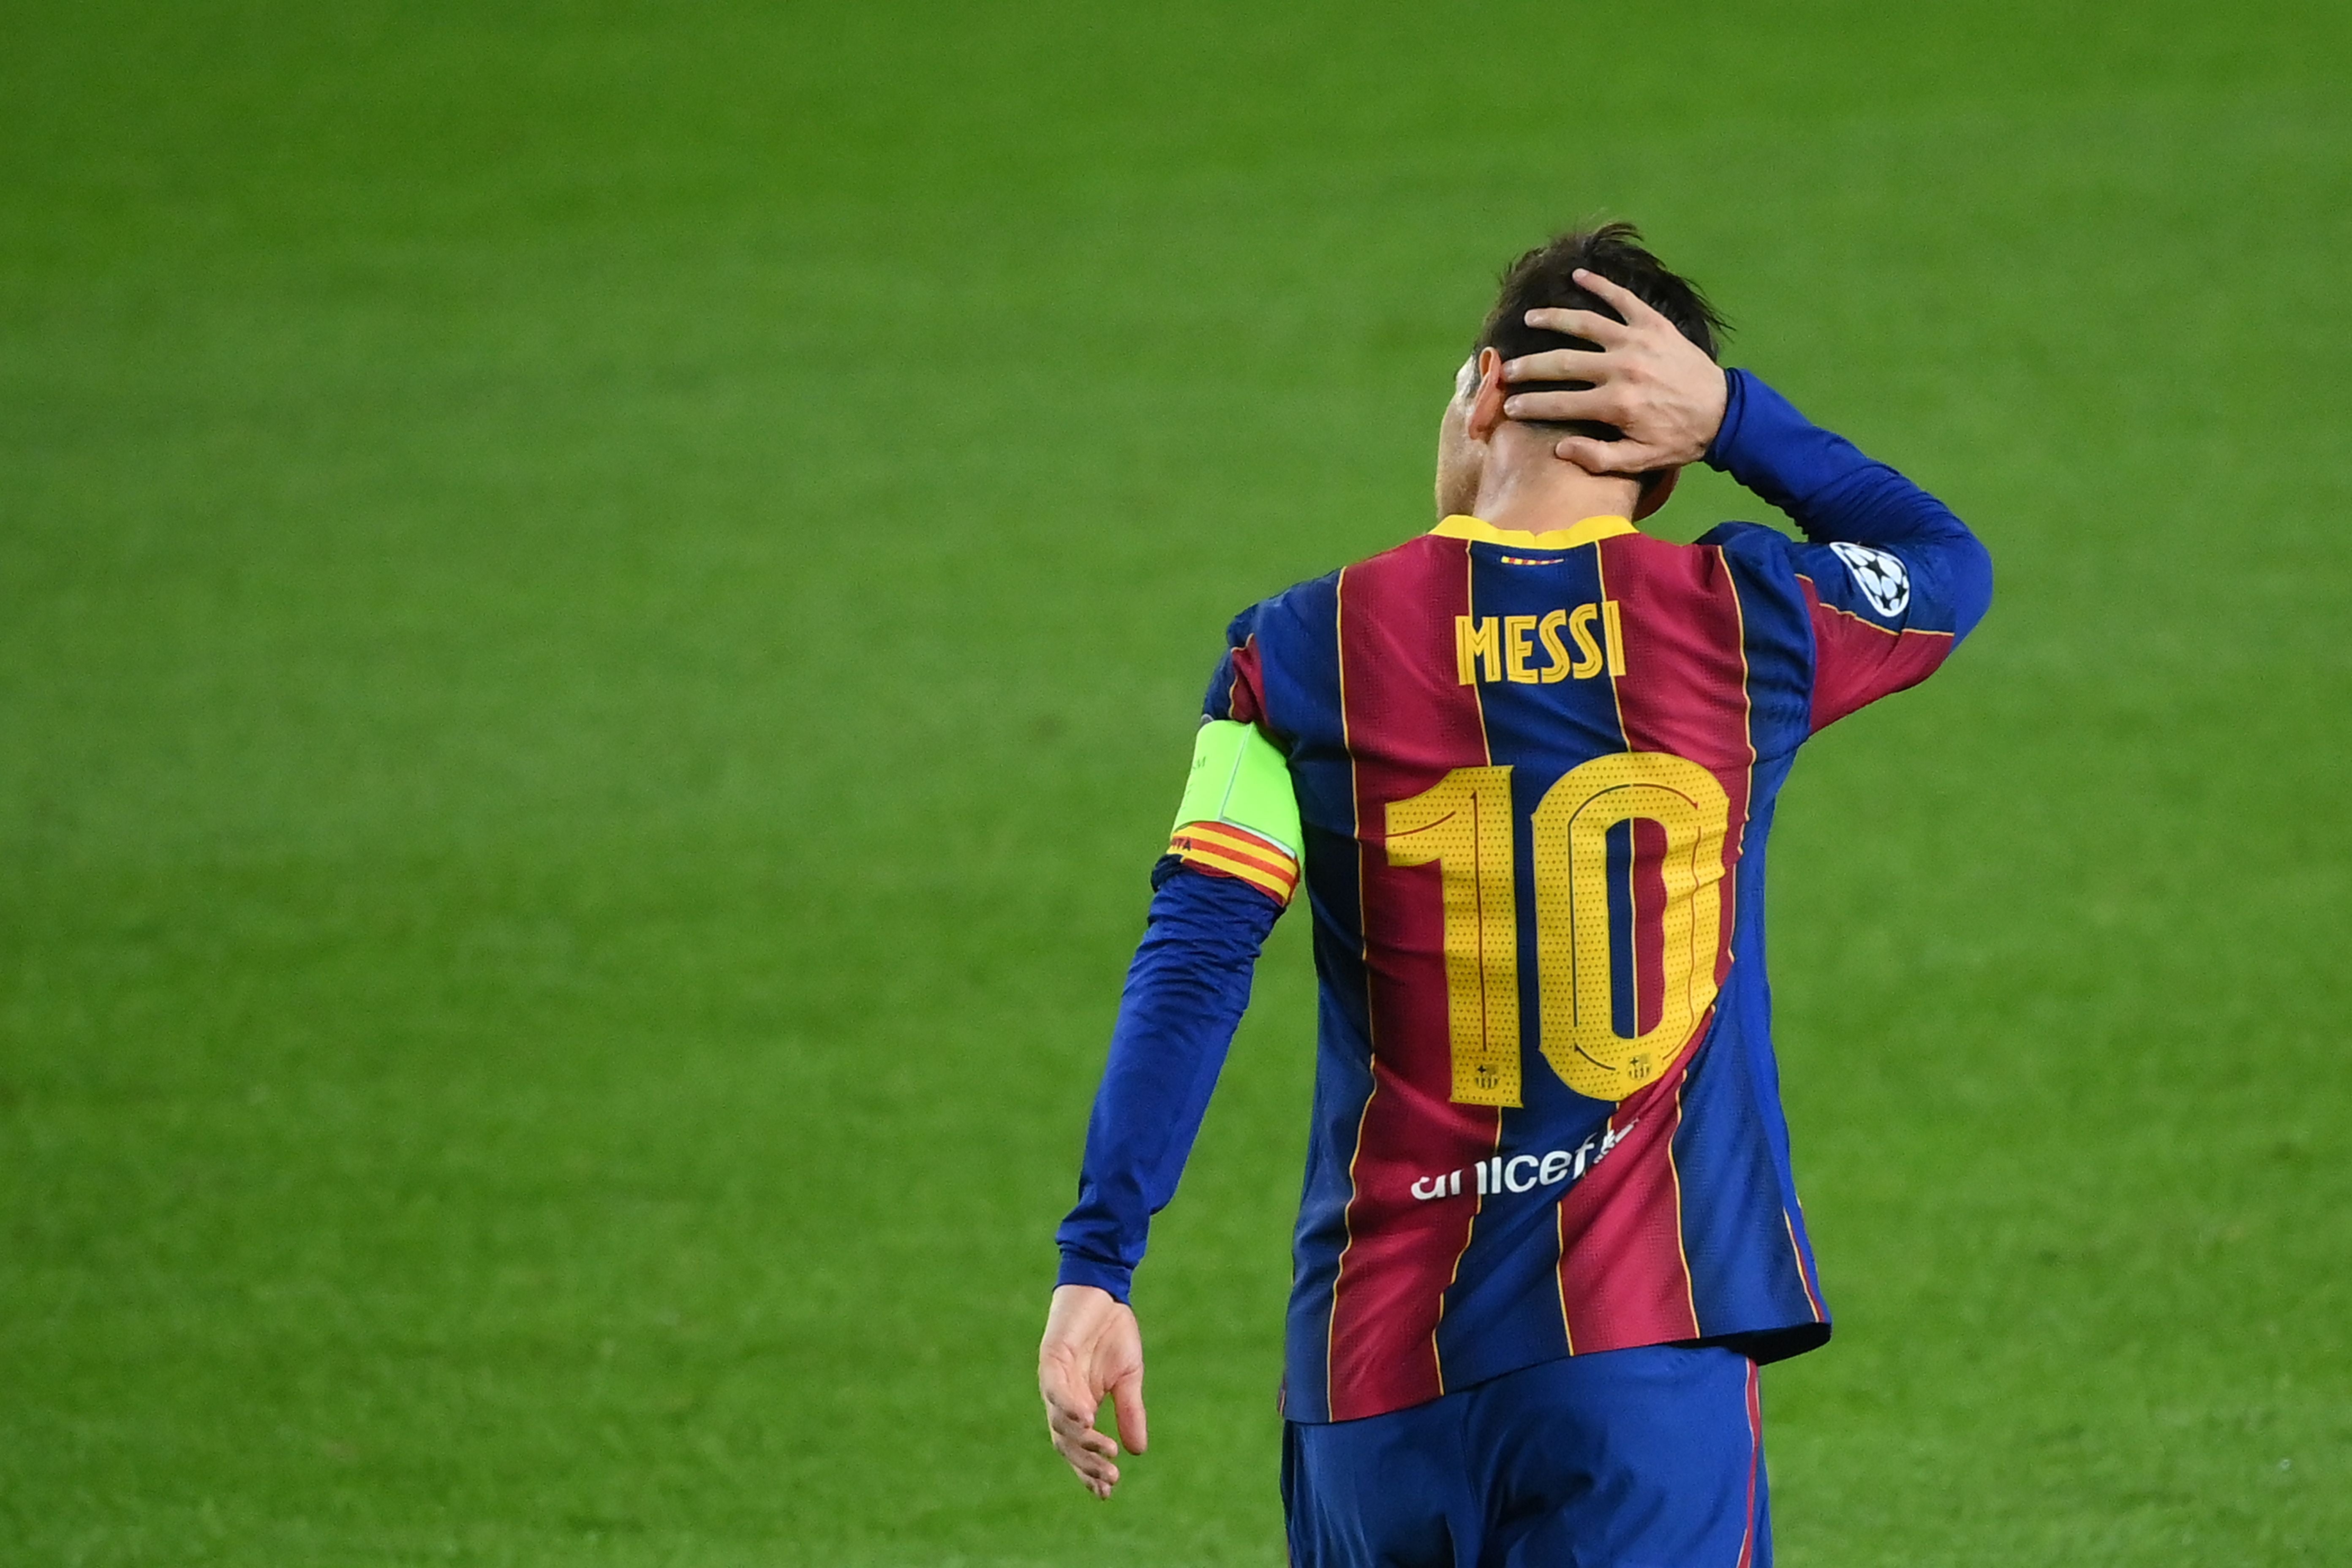 Some have argued Lionel Messi is blocking the potential for a drastic Barcelona rebuild